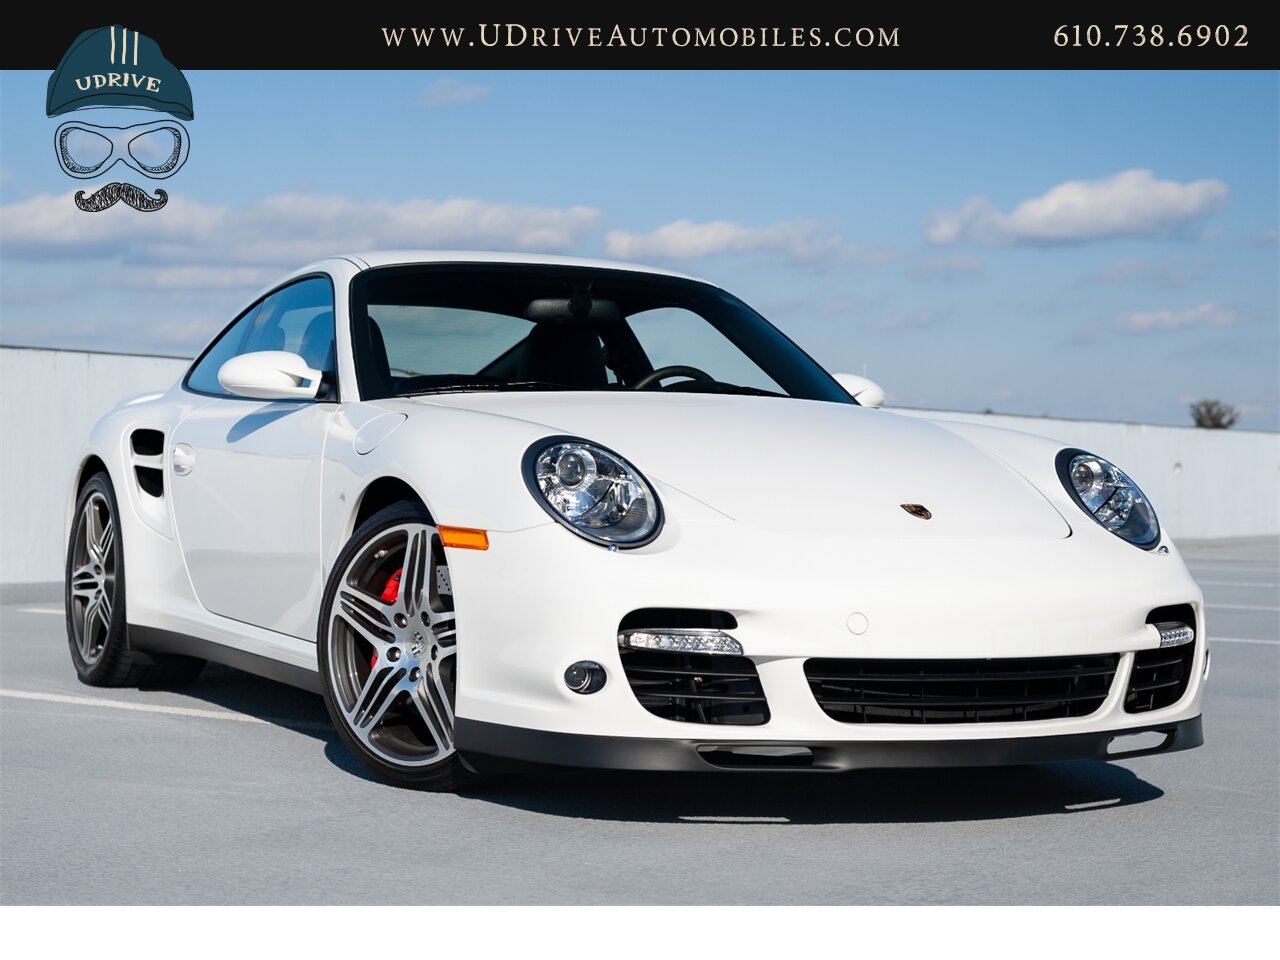 2007 Porsche 911 Turbo 642 Miles 1 Owner Carrara White 997  Sport Chrono Adaptive Sport Seats All Documentation from New - Photo 5 - West Chester, PA 19382